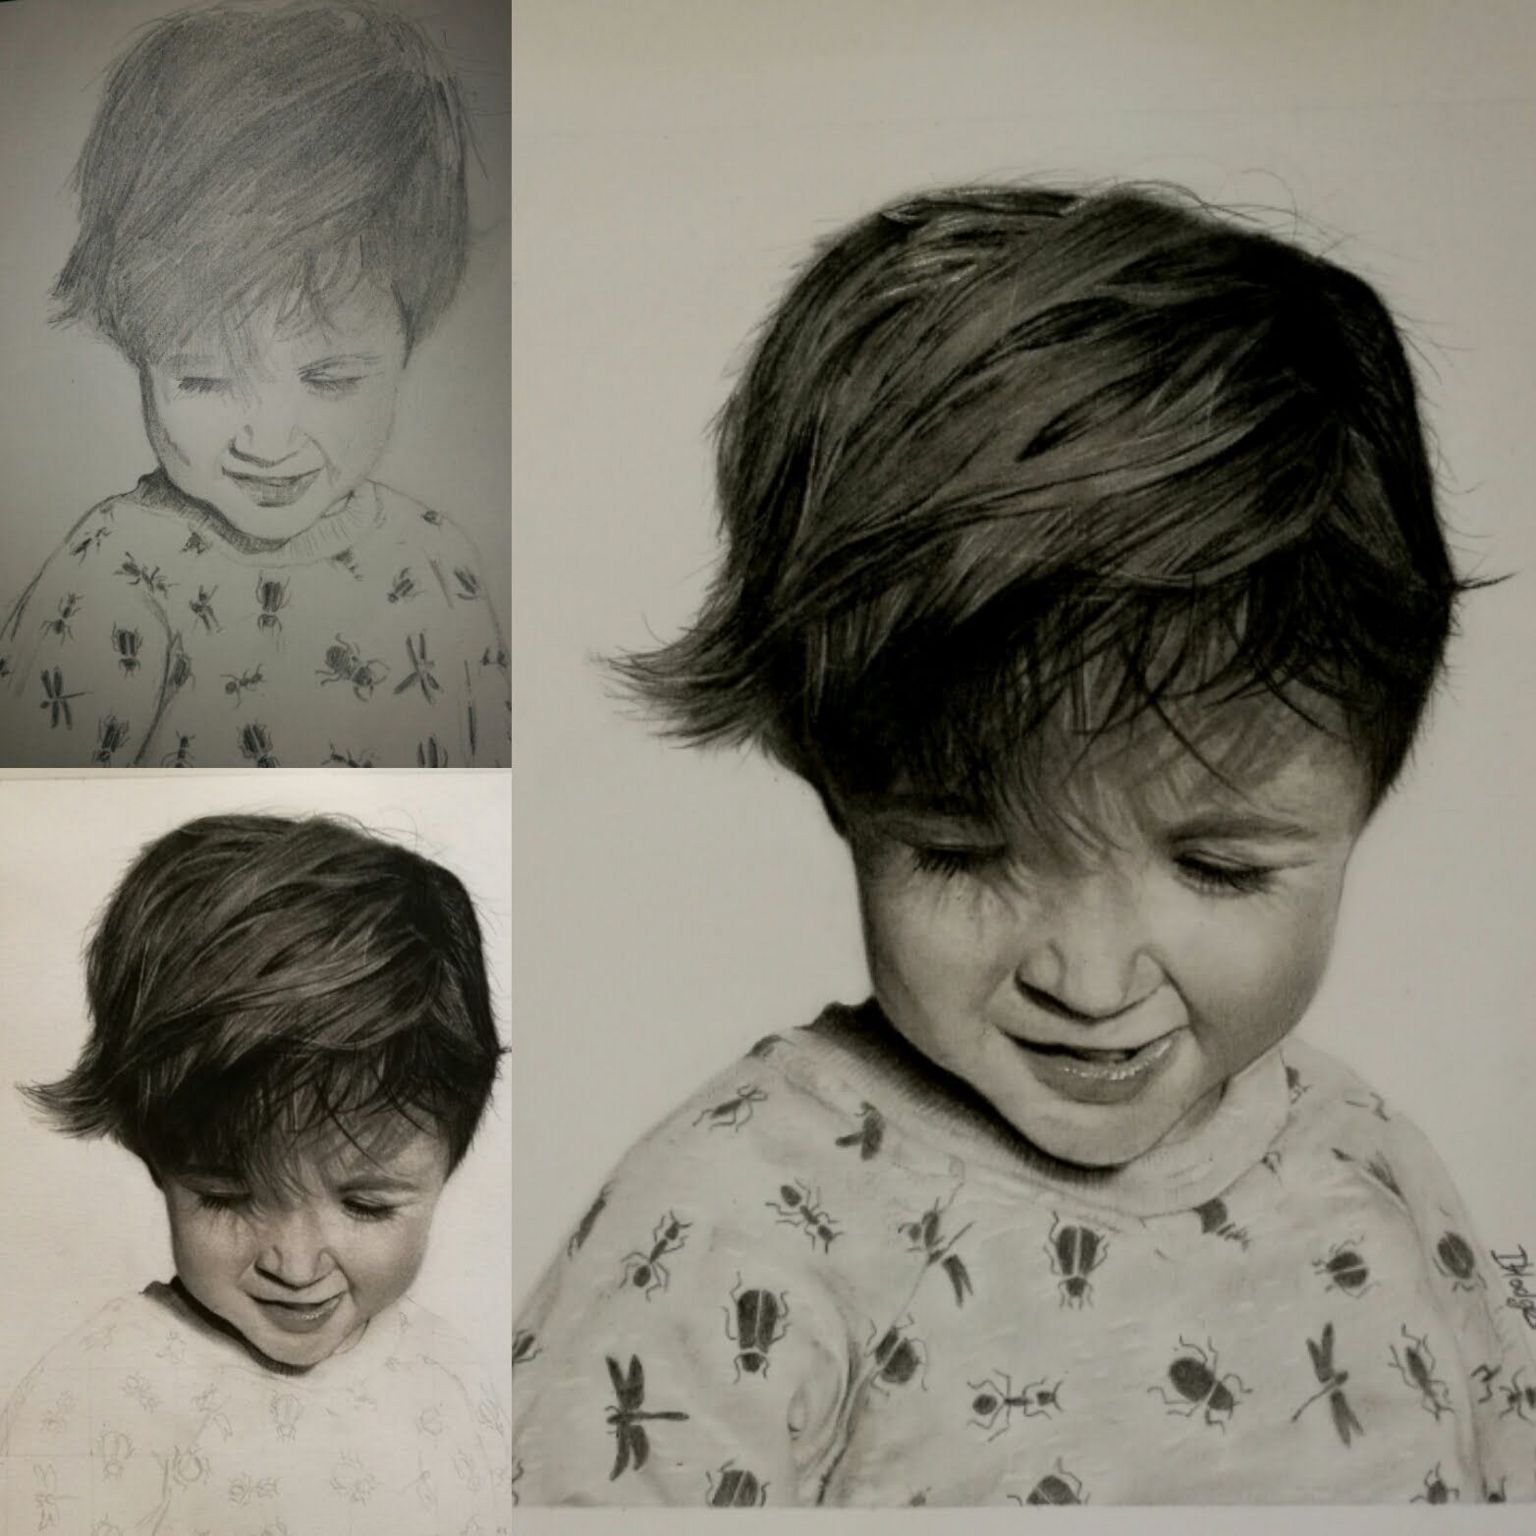 A photorealistic drawing of a young boy